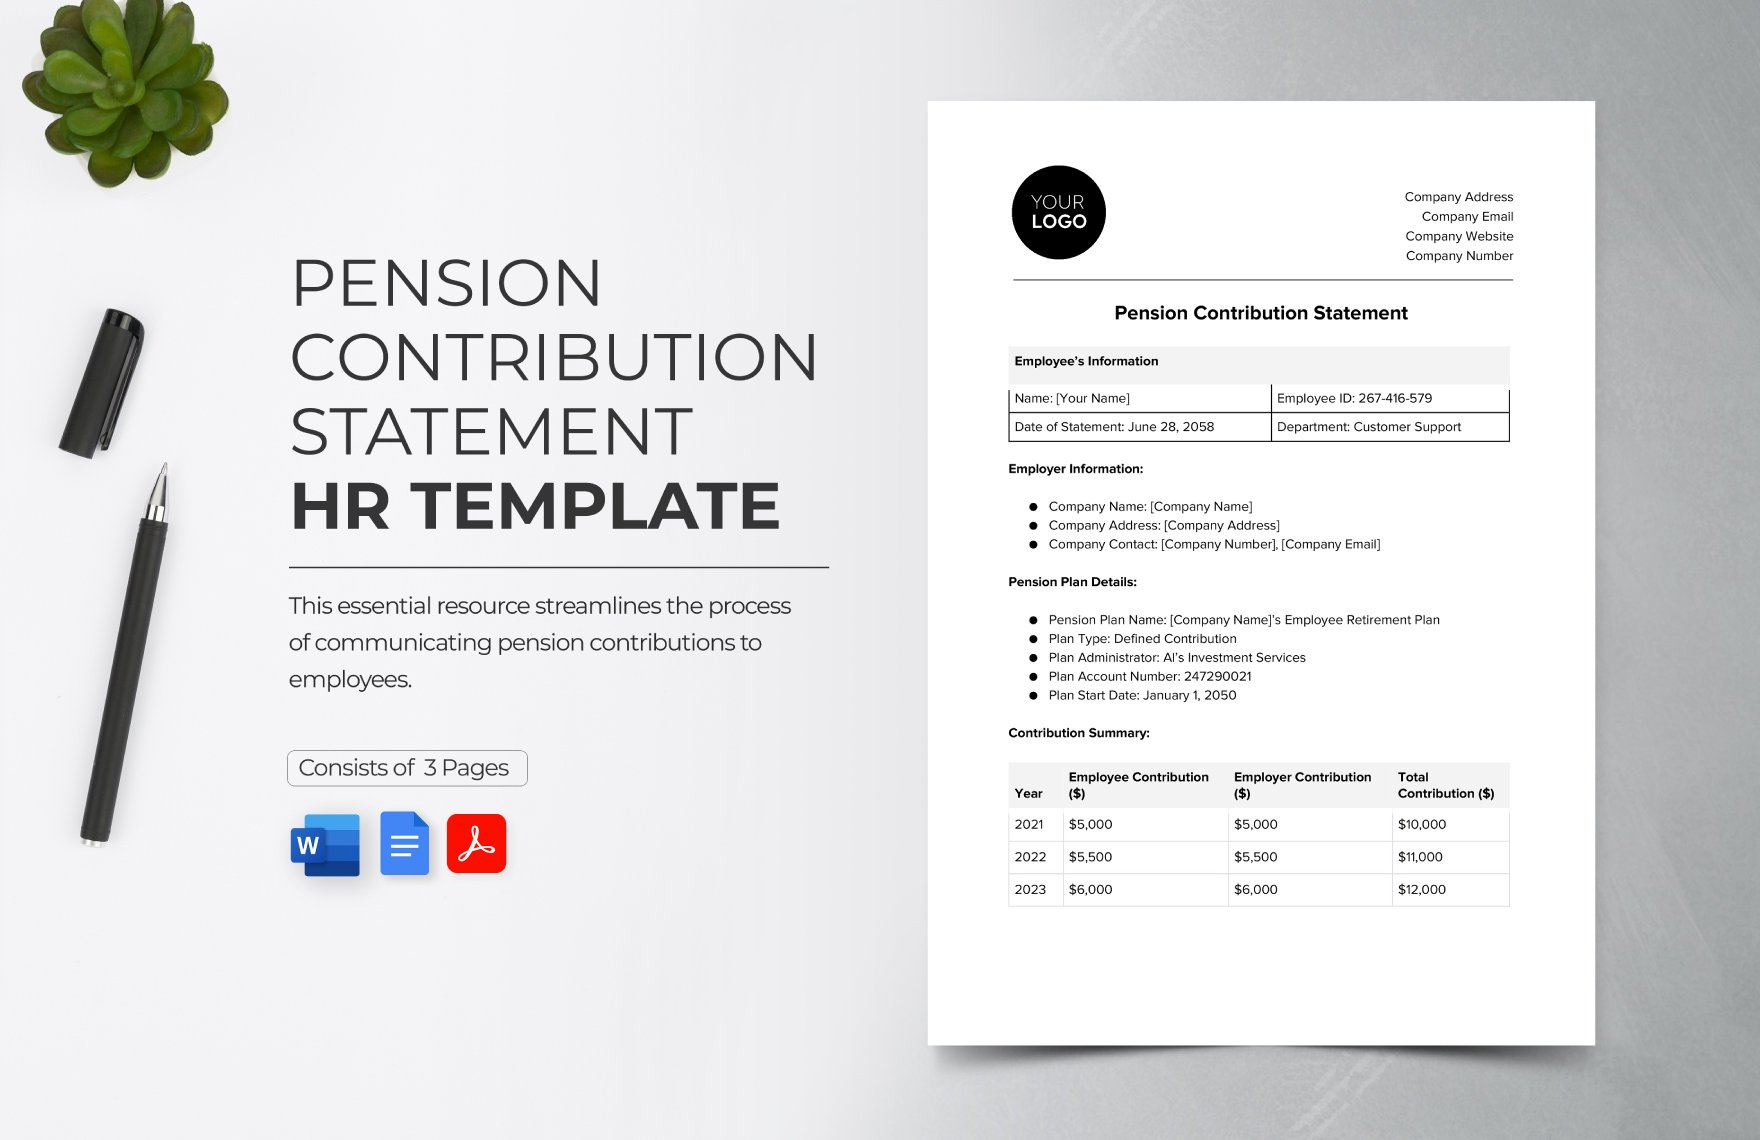 Pension Contribution Statement HR Template in Word, Google Docs, PDF